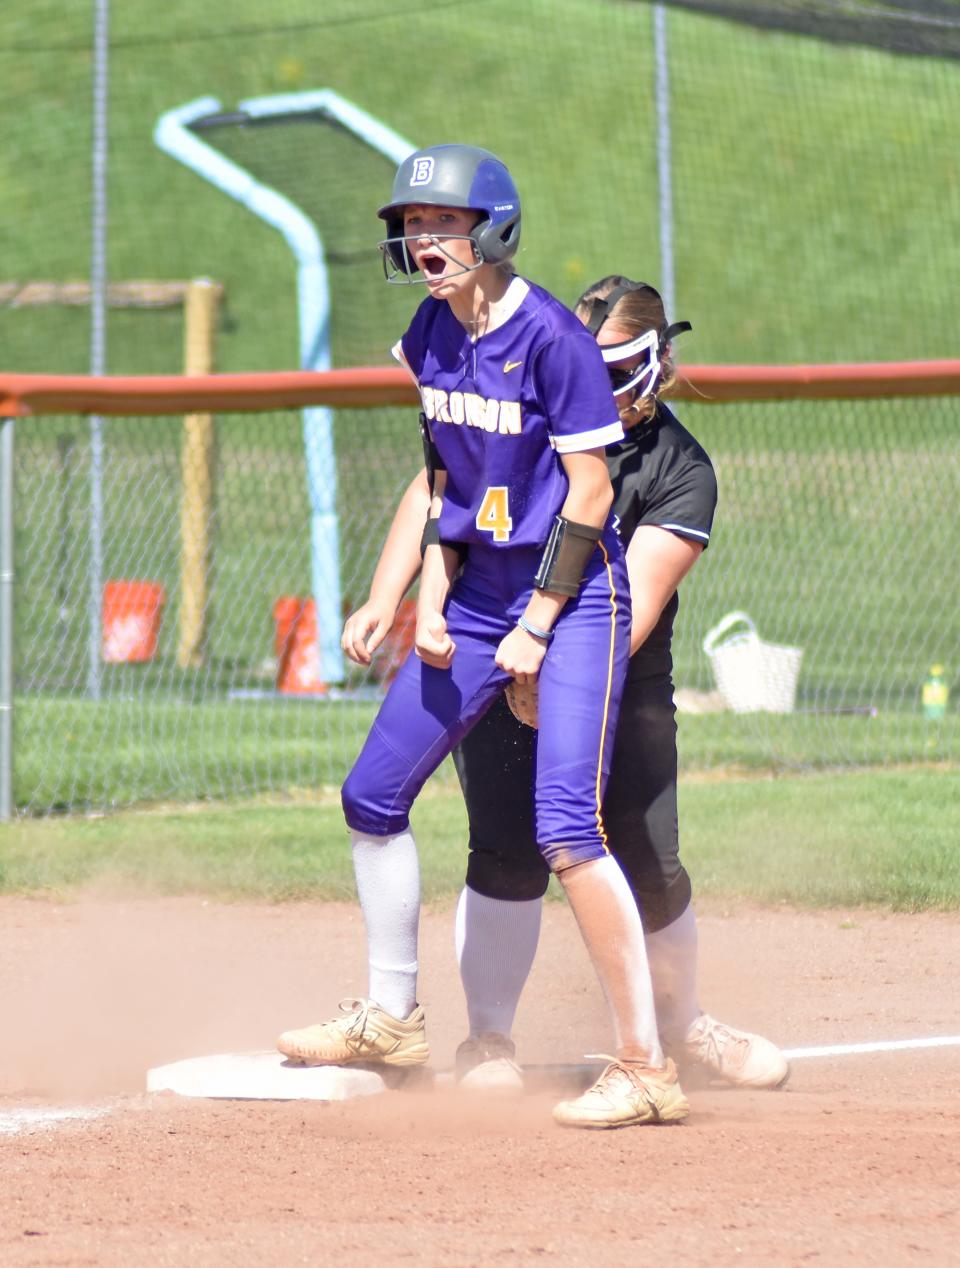 Bronson's Ashlynn Harris lets our a yell after a big triple helped get Bronson on the board versus Quincy on Wedneaday